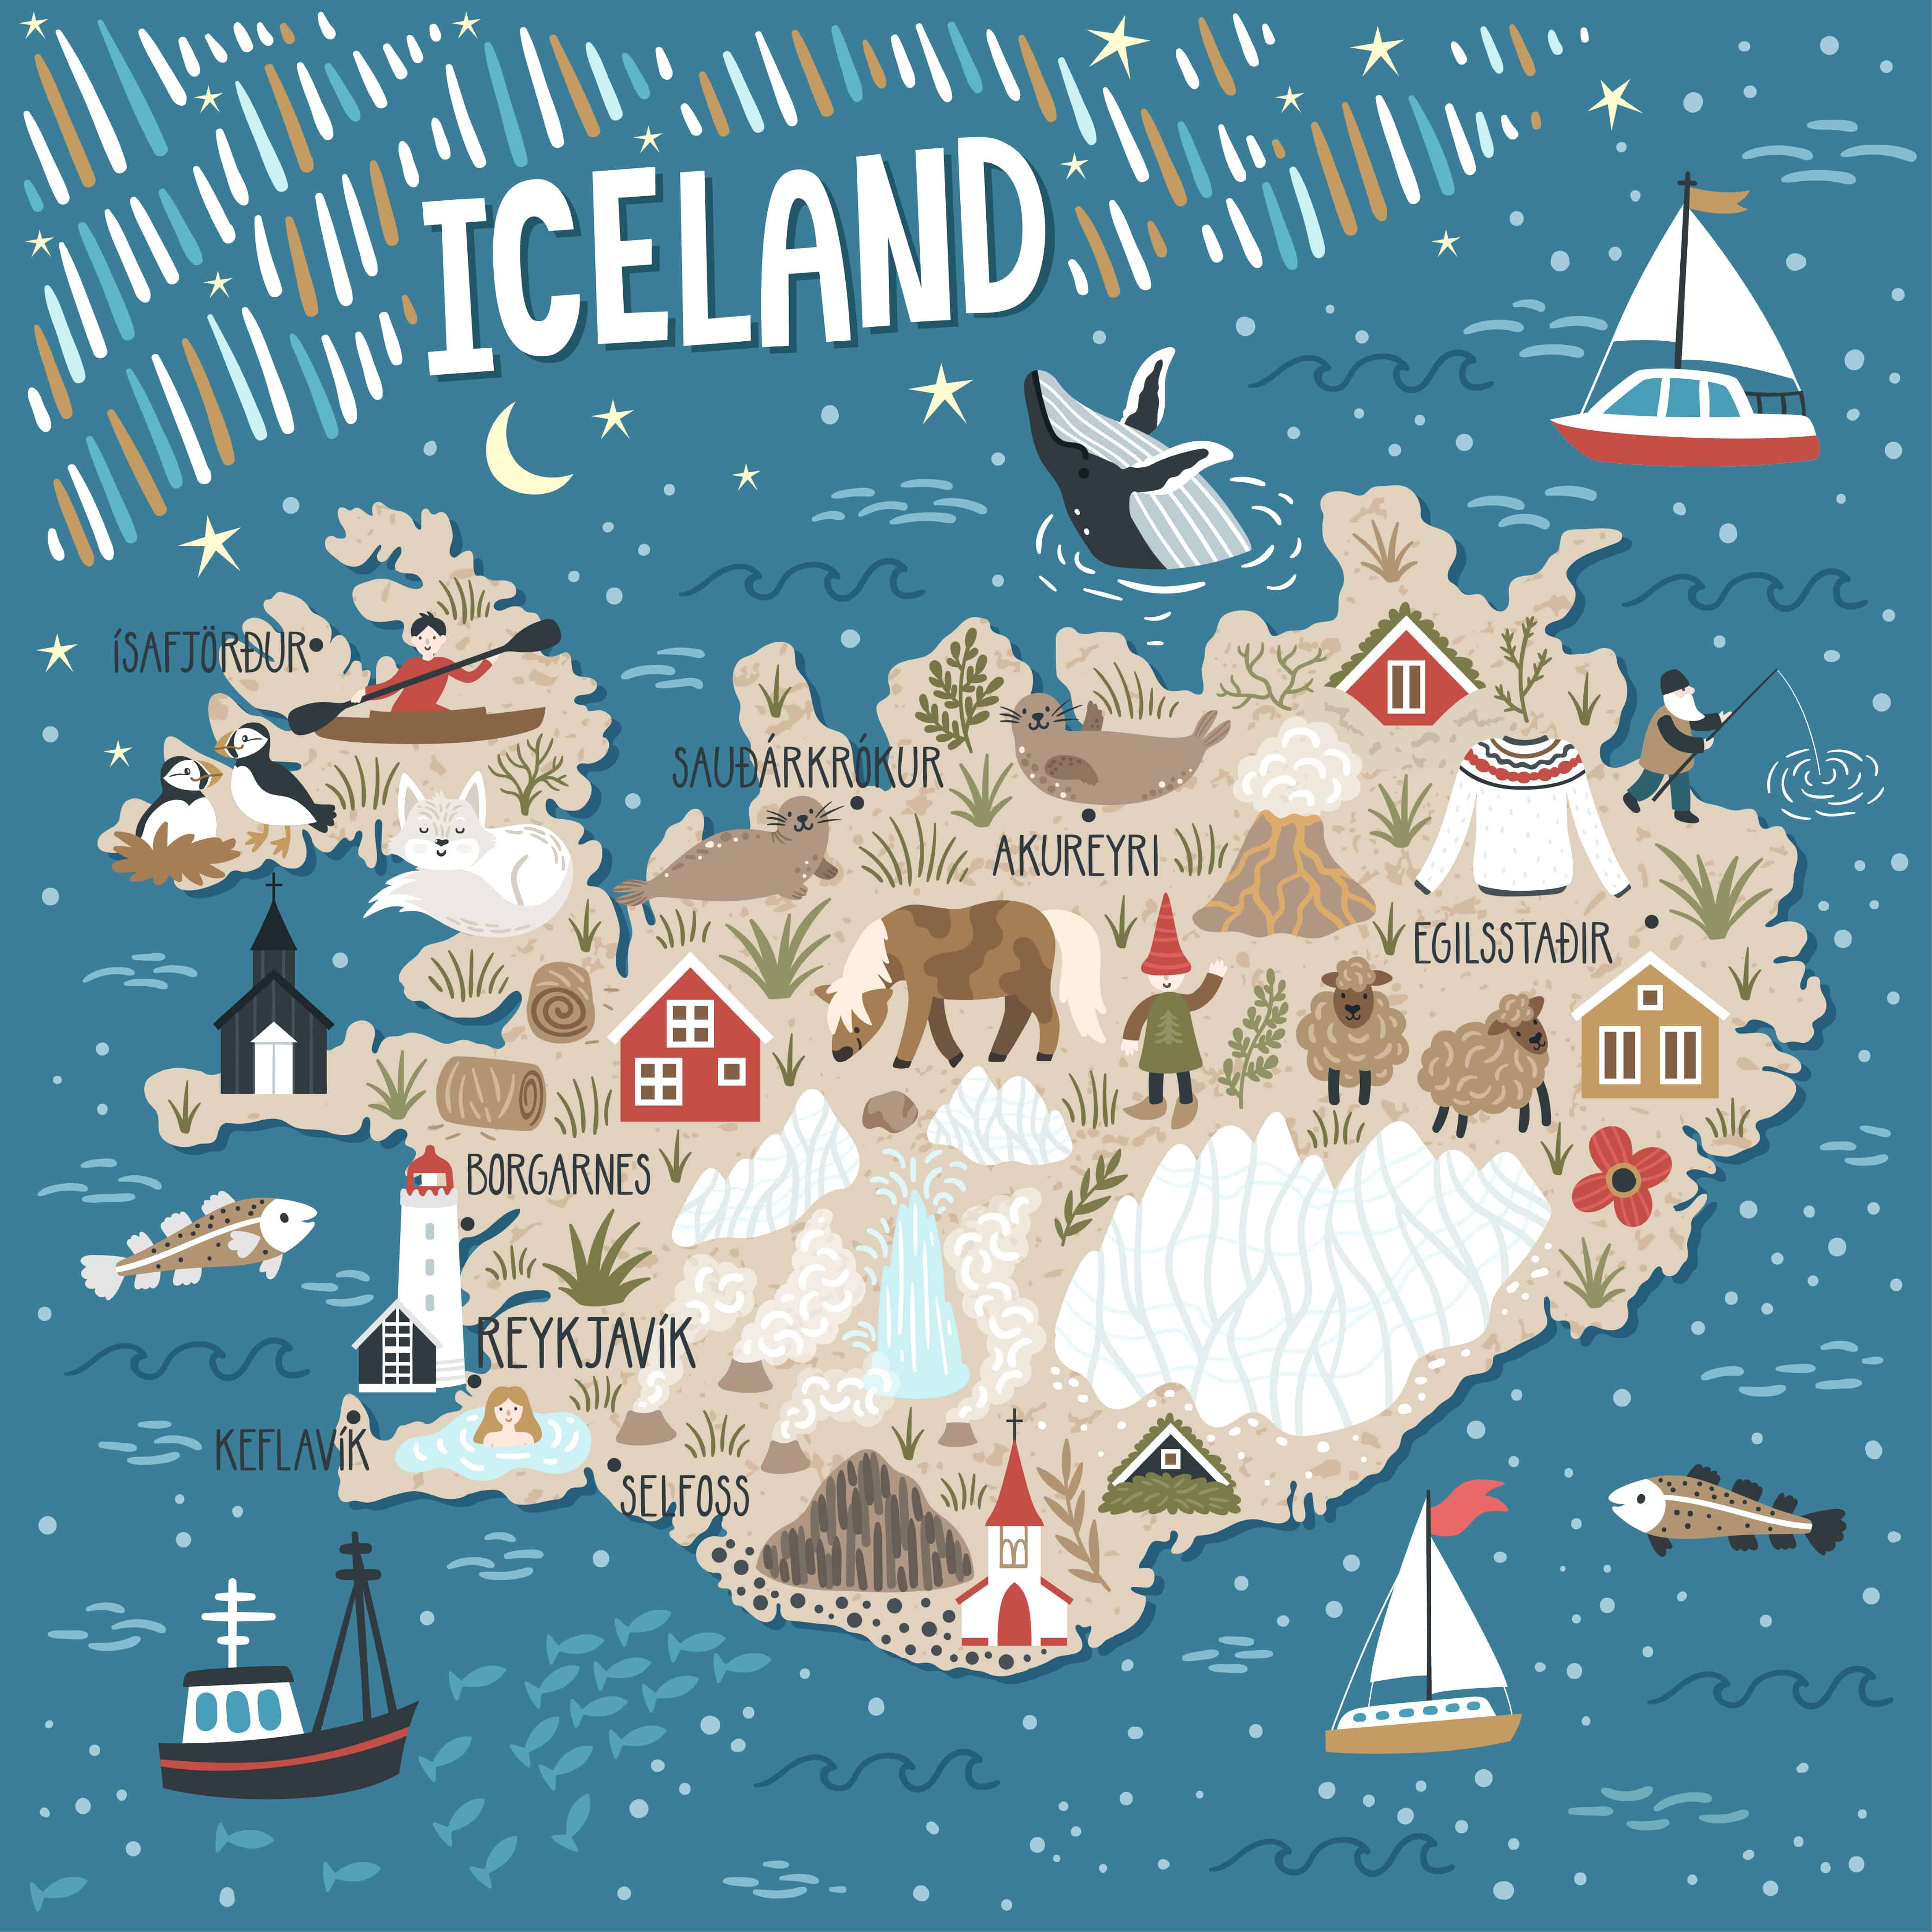 travel guidelines iceland